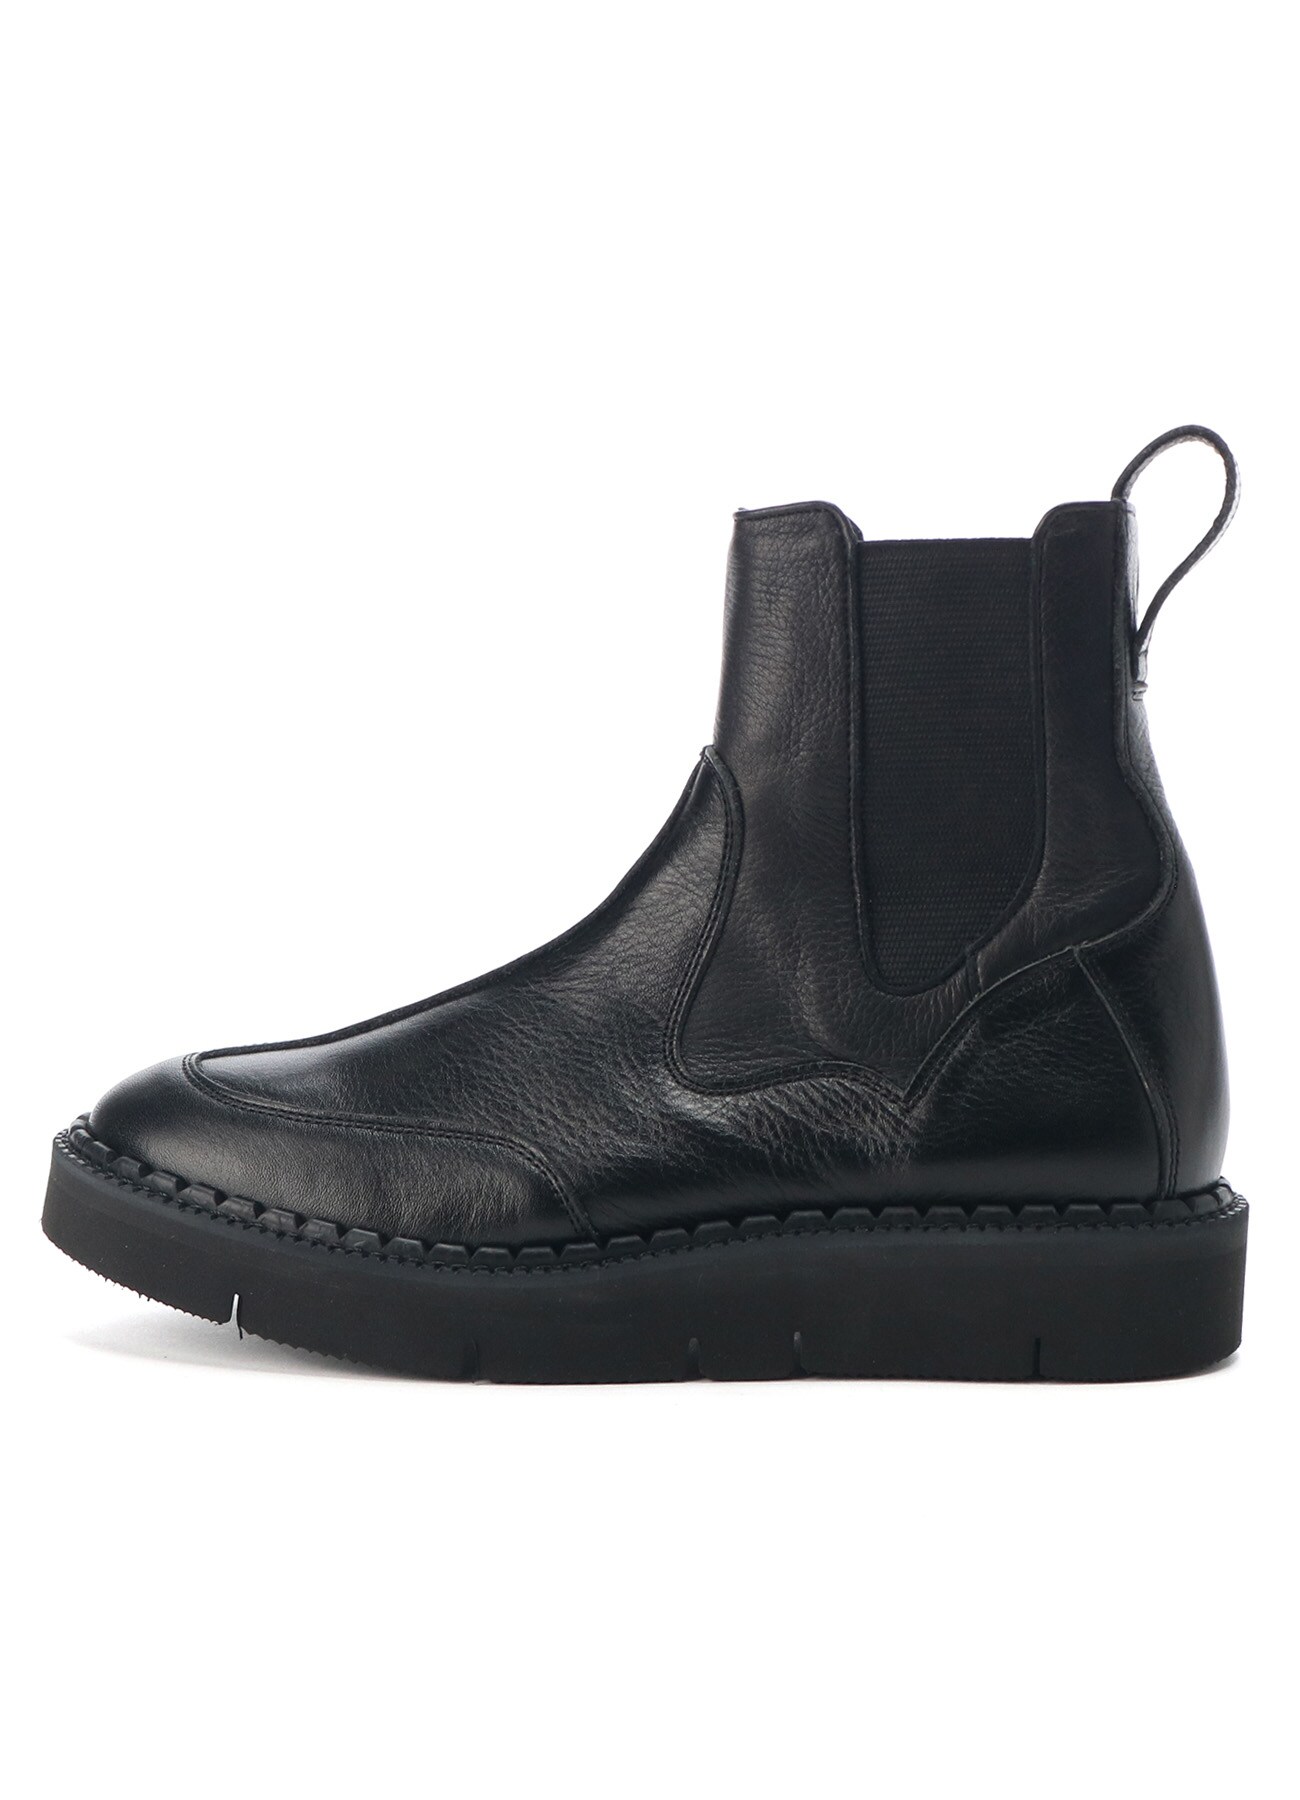 LEATHER COMBI SIDE GORE BOOTS